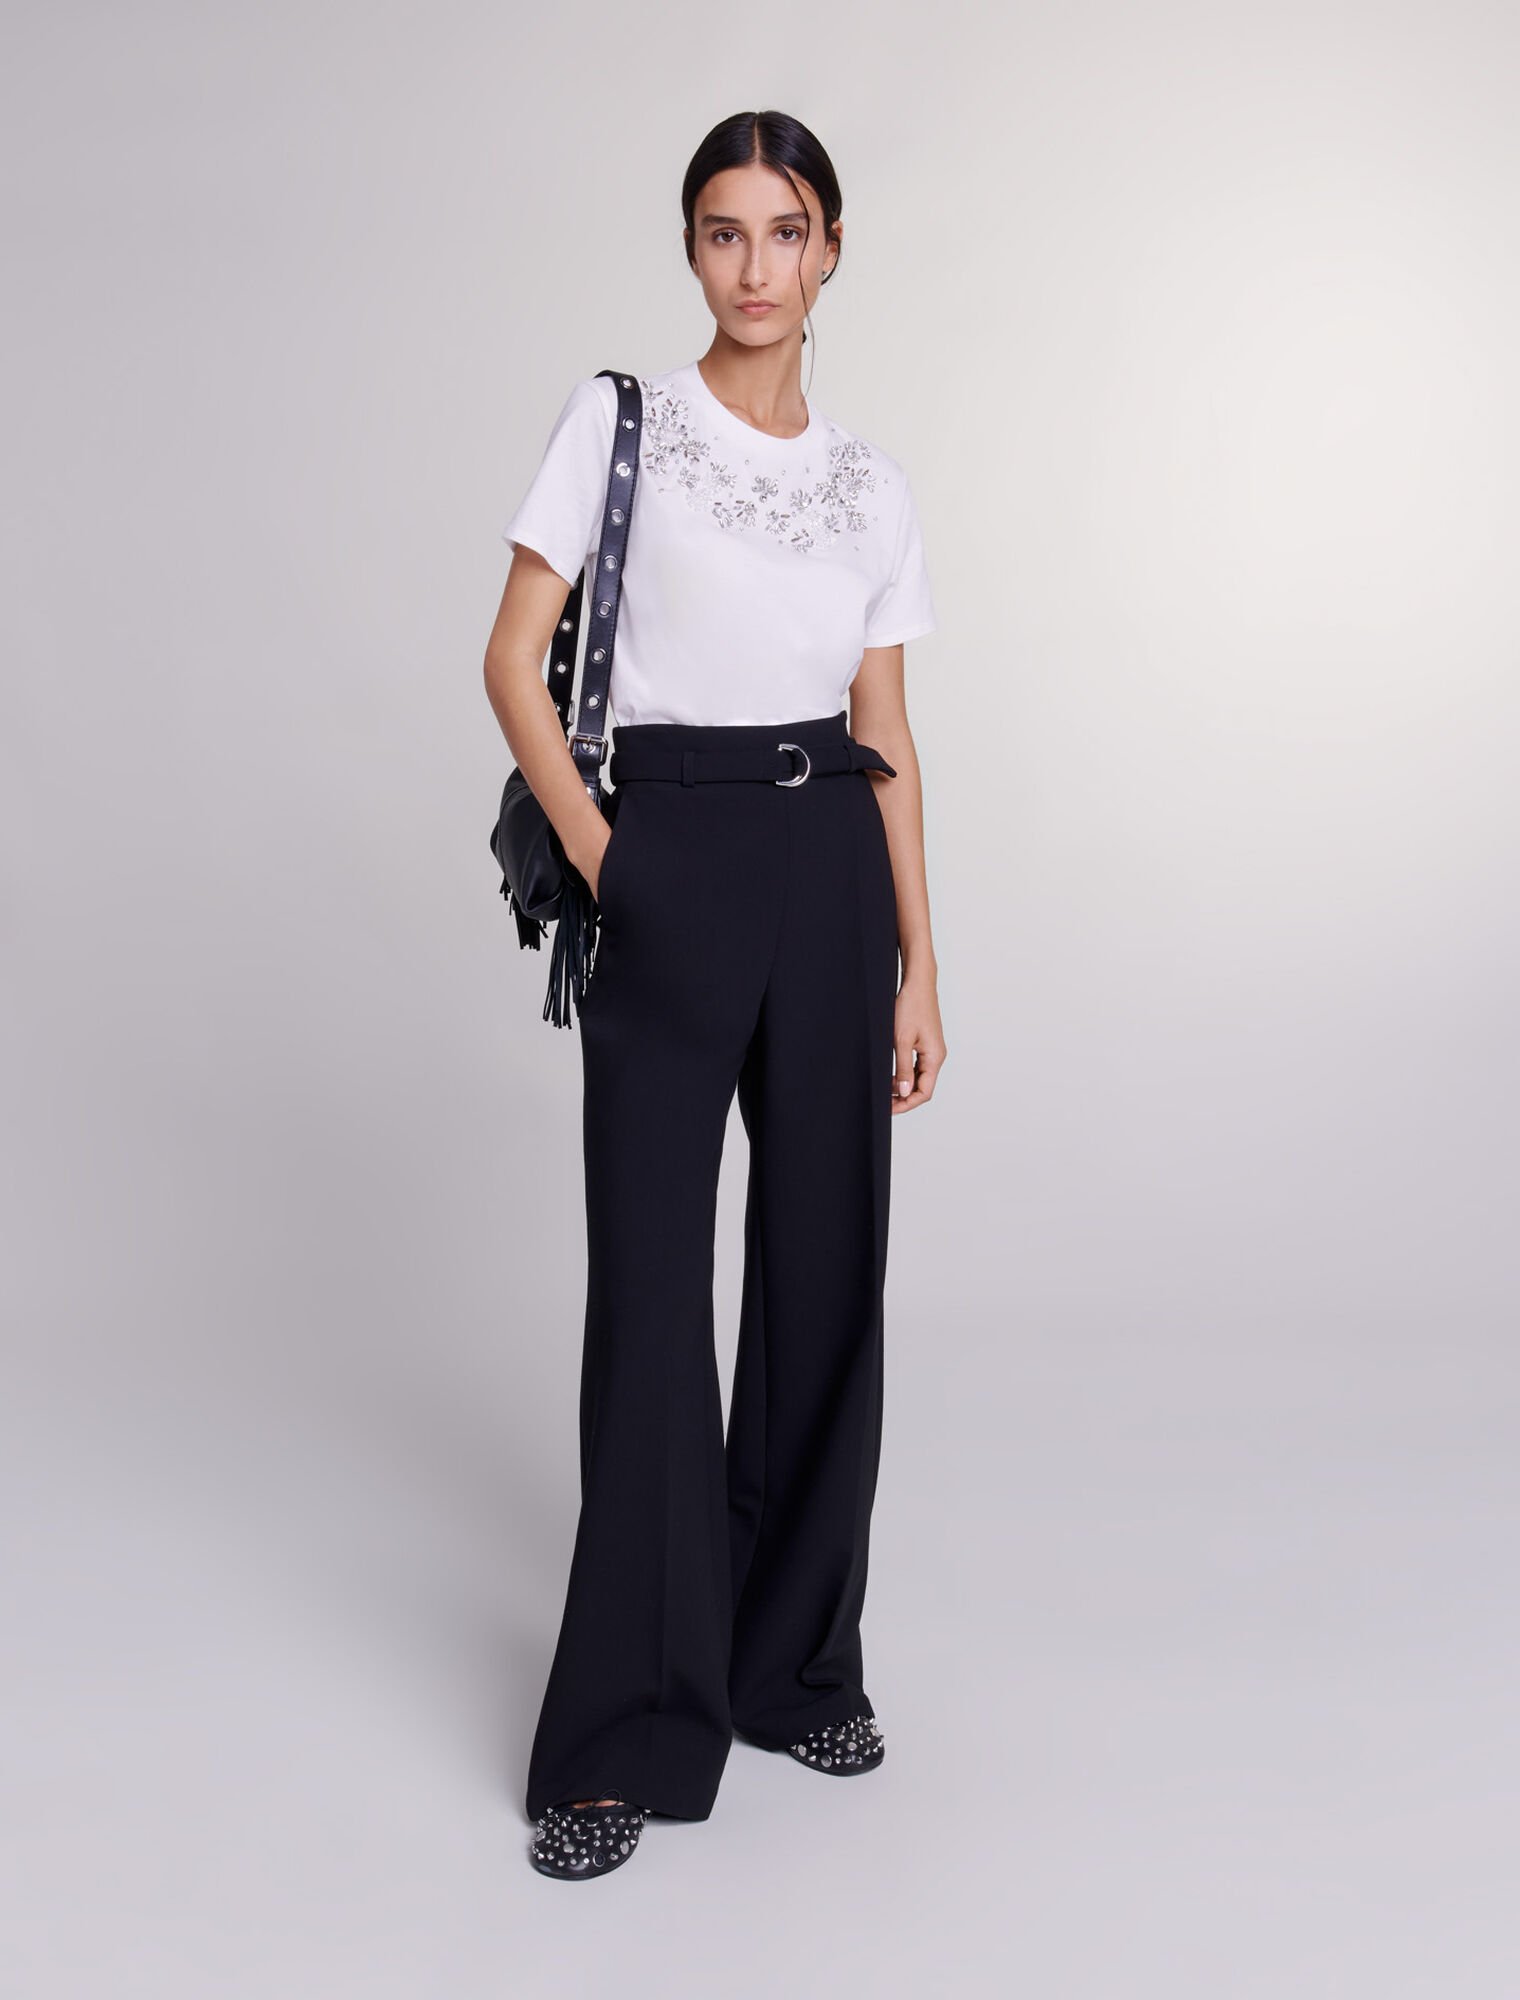 Wide belted trousers